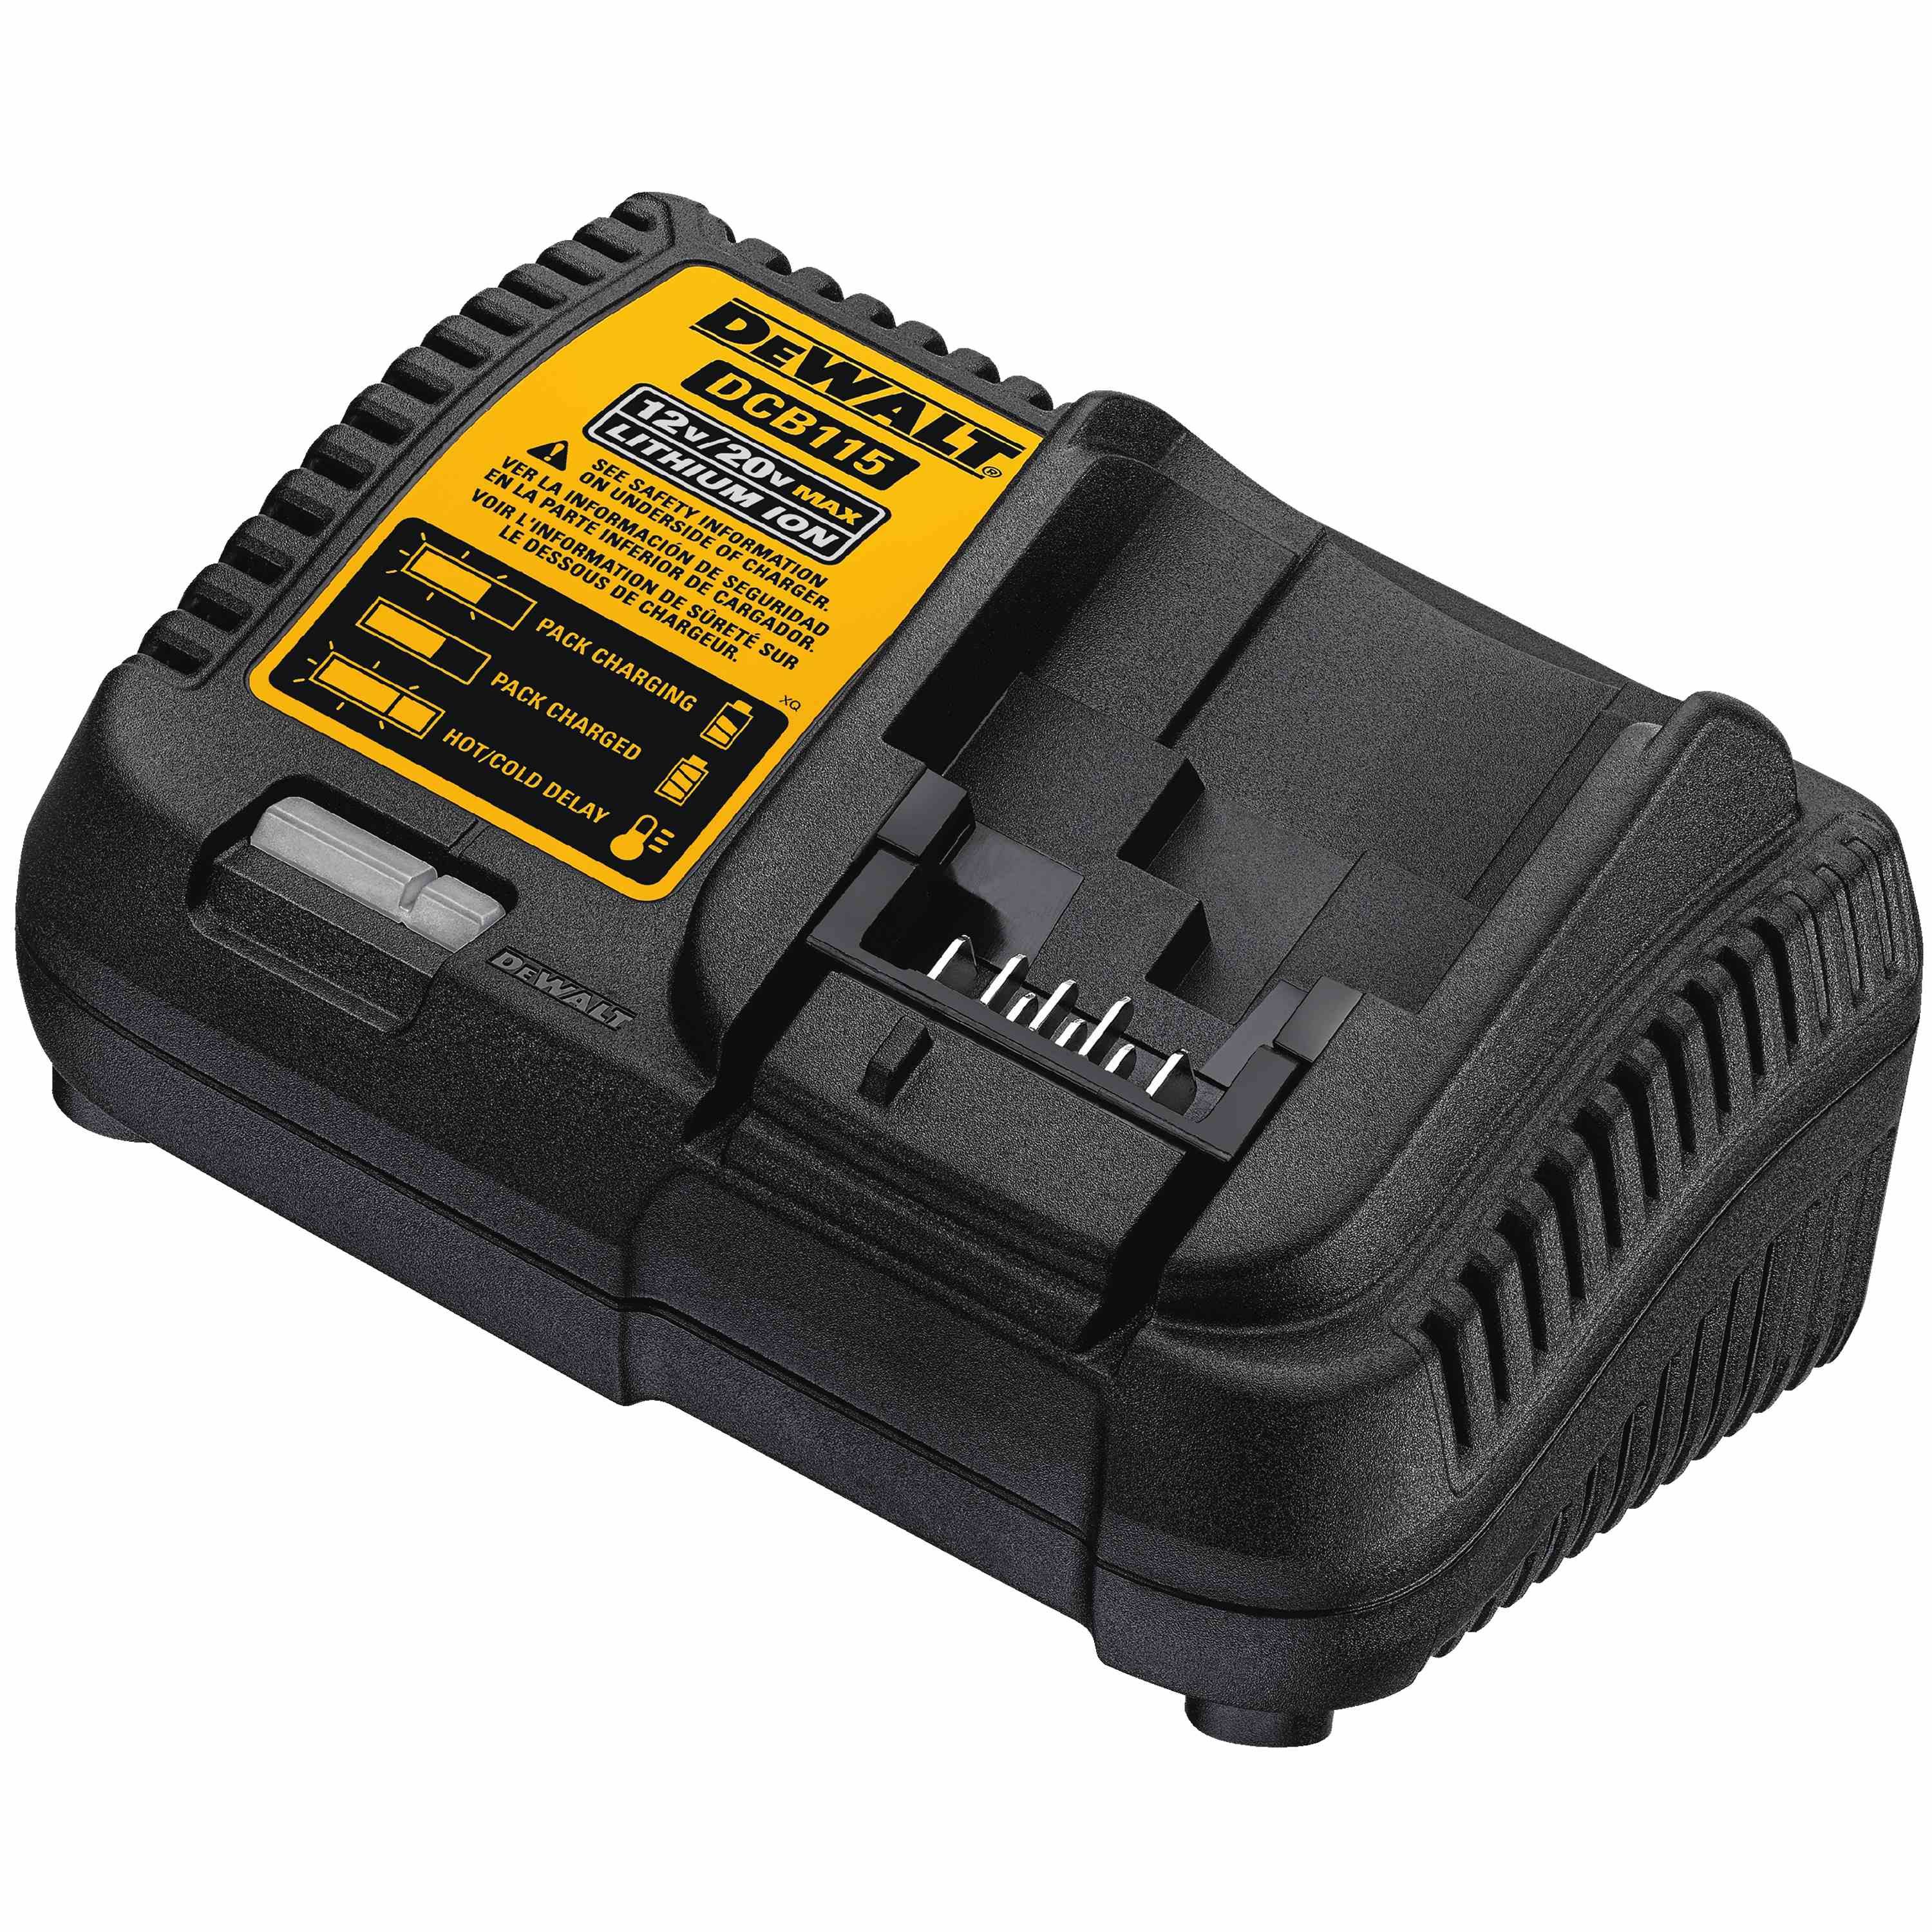 Dewalt Max Power Tool Battery Charger - 20V, Lithium Ion